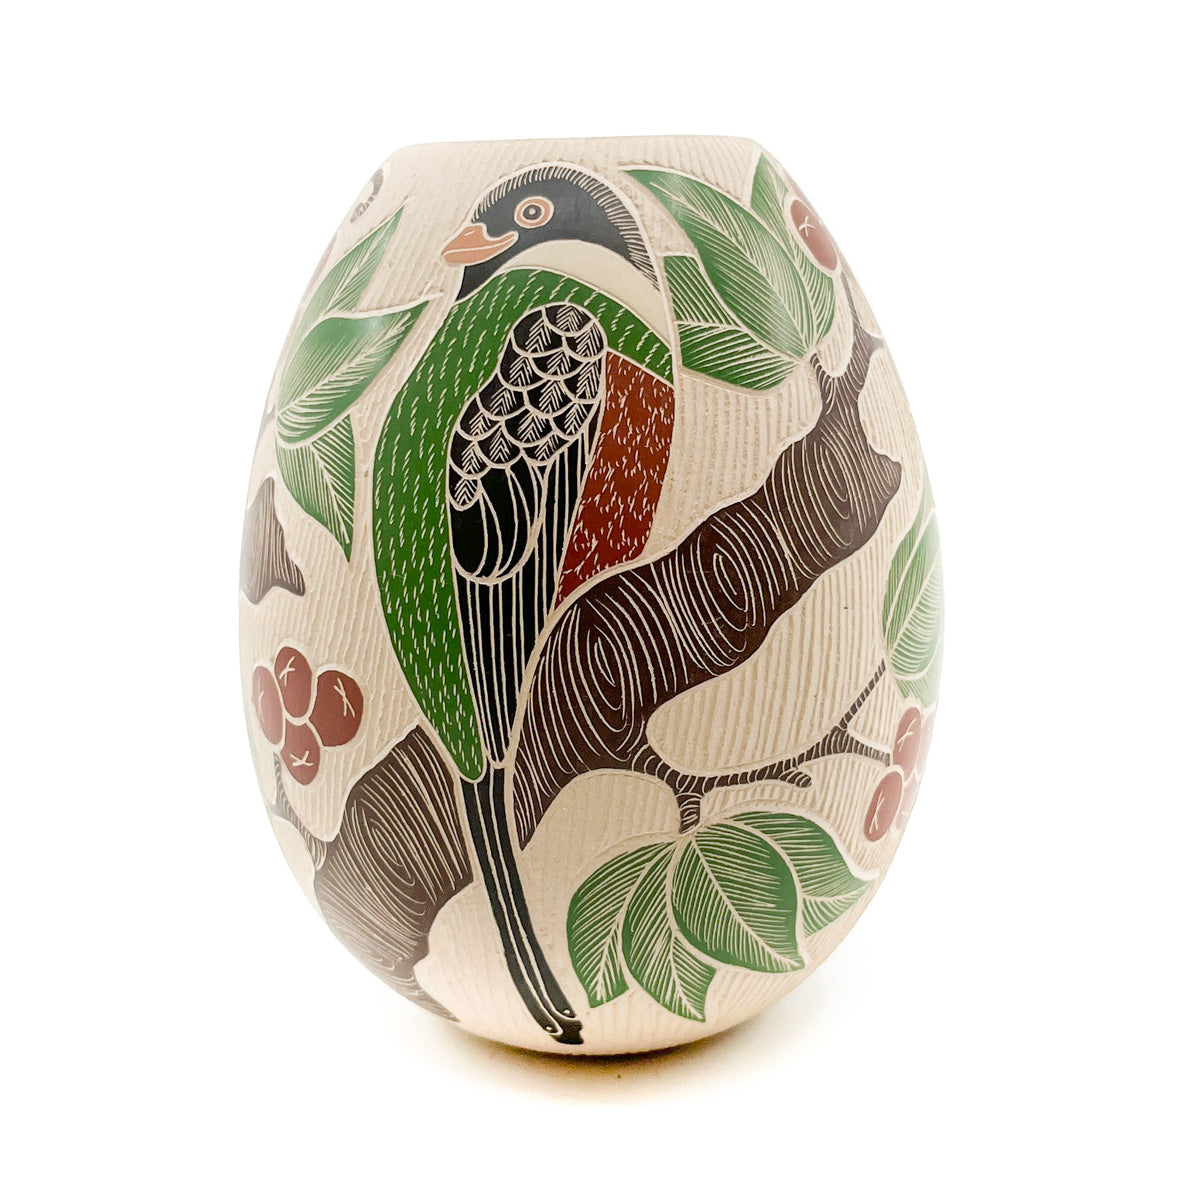 Load image into Gallery viewer, Painted Bird Design with Branches and Berries and Sgraffito
